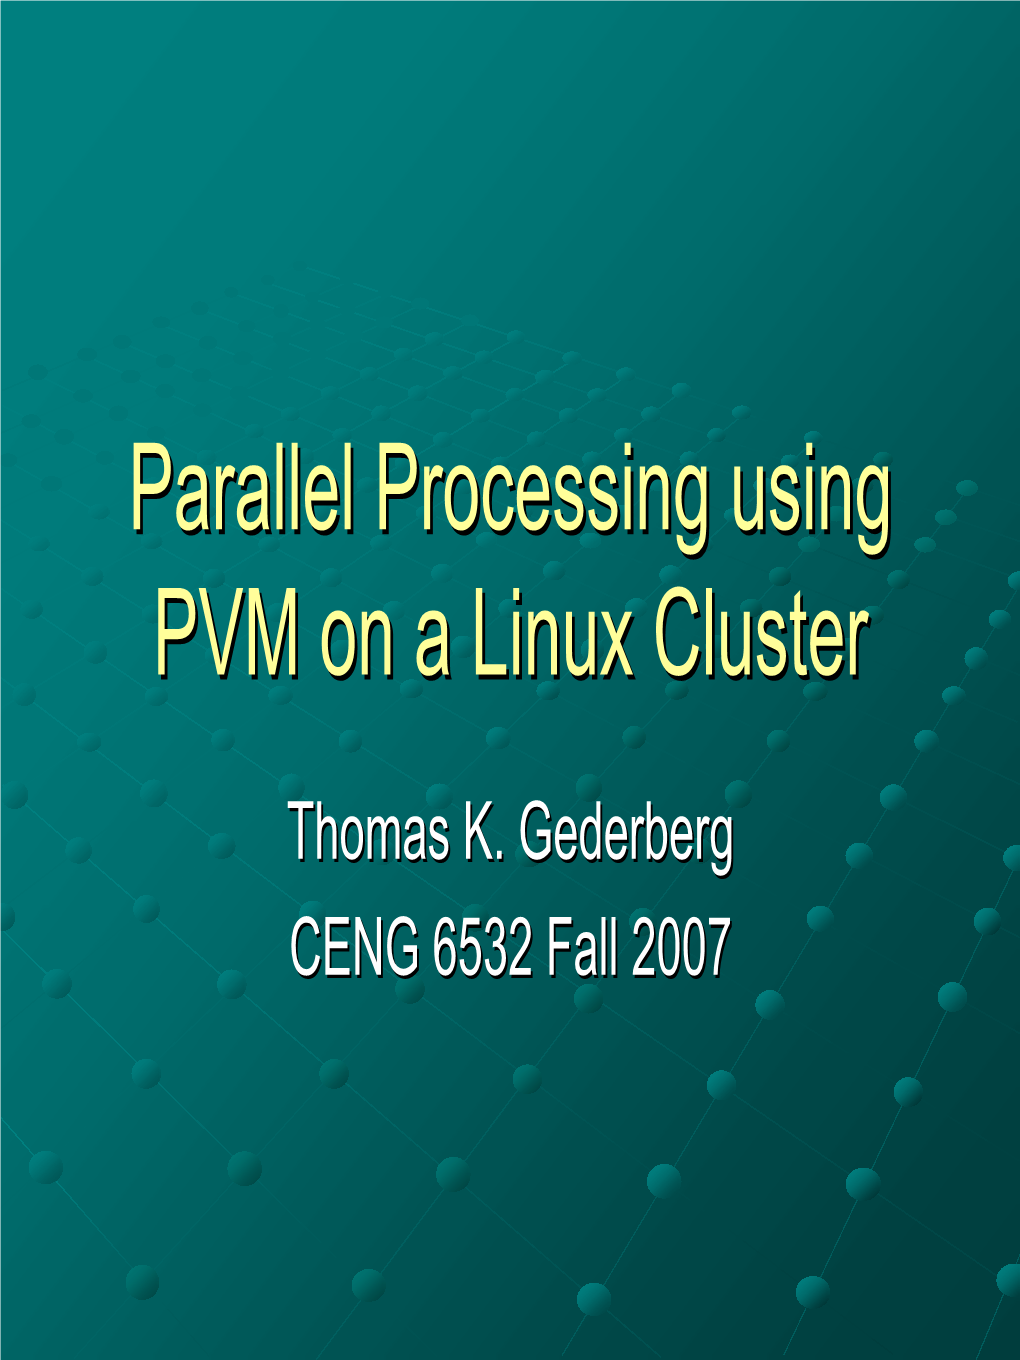 Parallel Processing Using PVM on a Linux Cluster